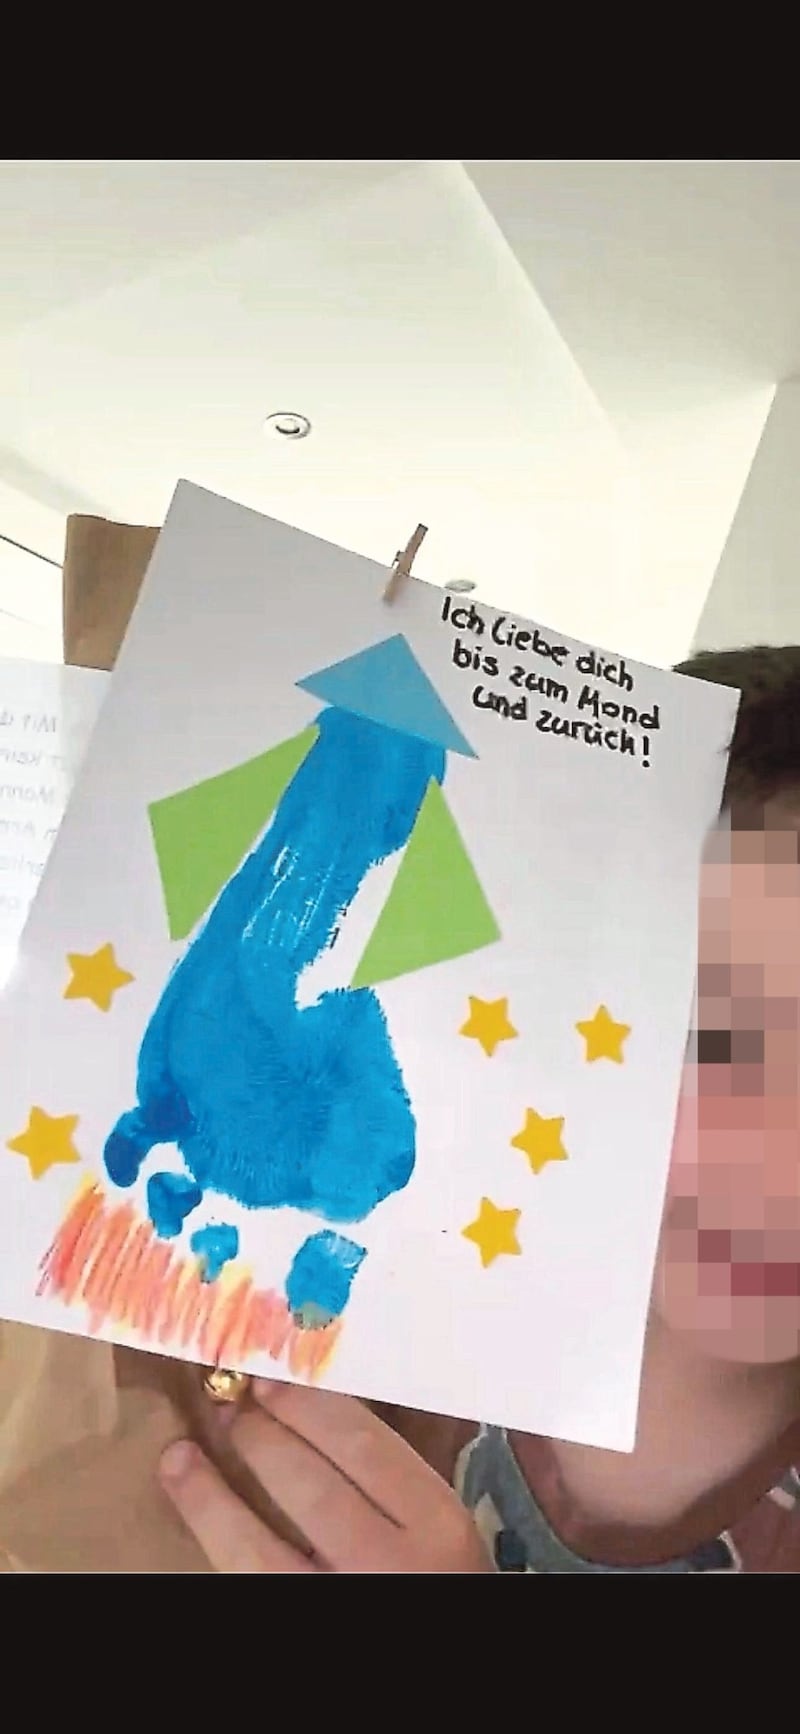 Heartbreaking message from the boy to his dad on Father's Day. (Bild: G. Pilz)